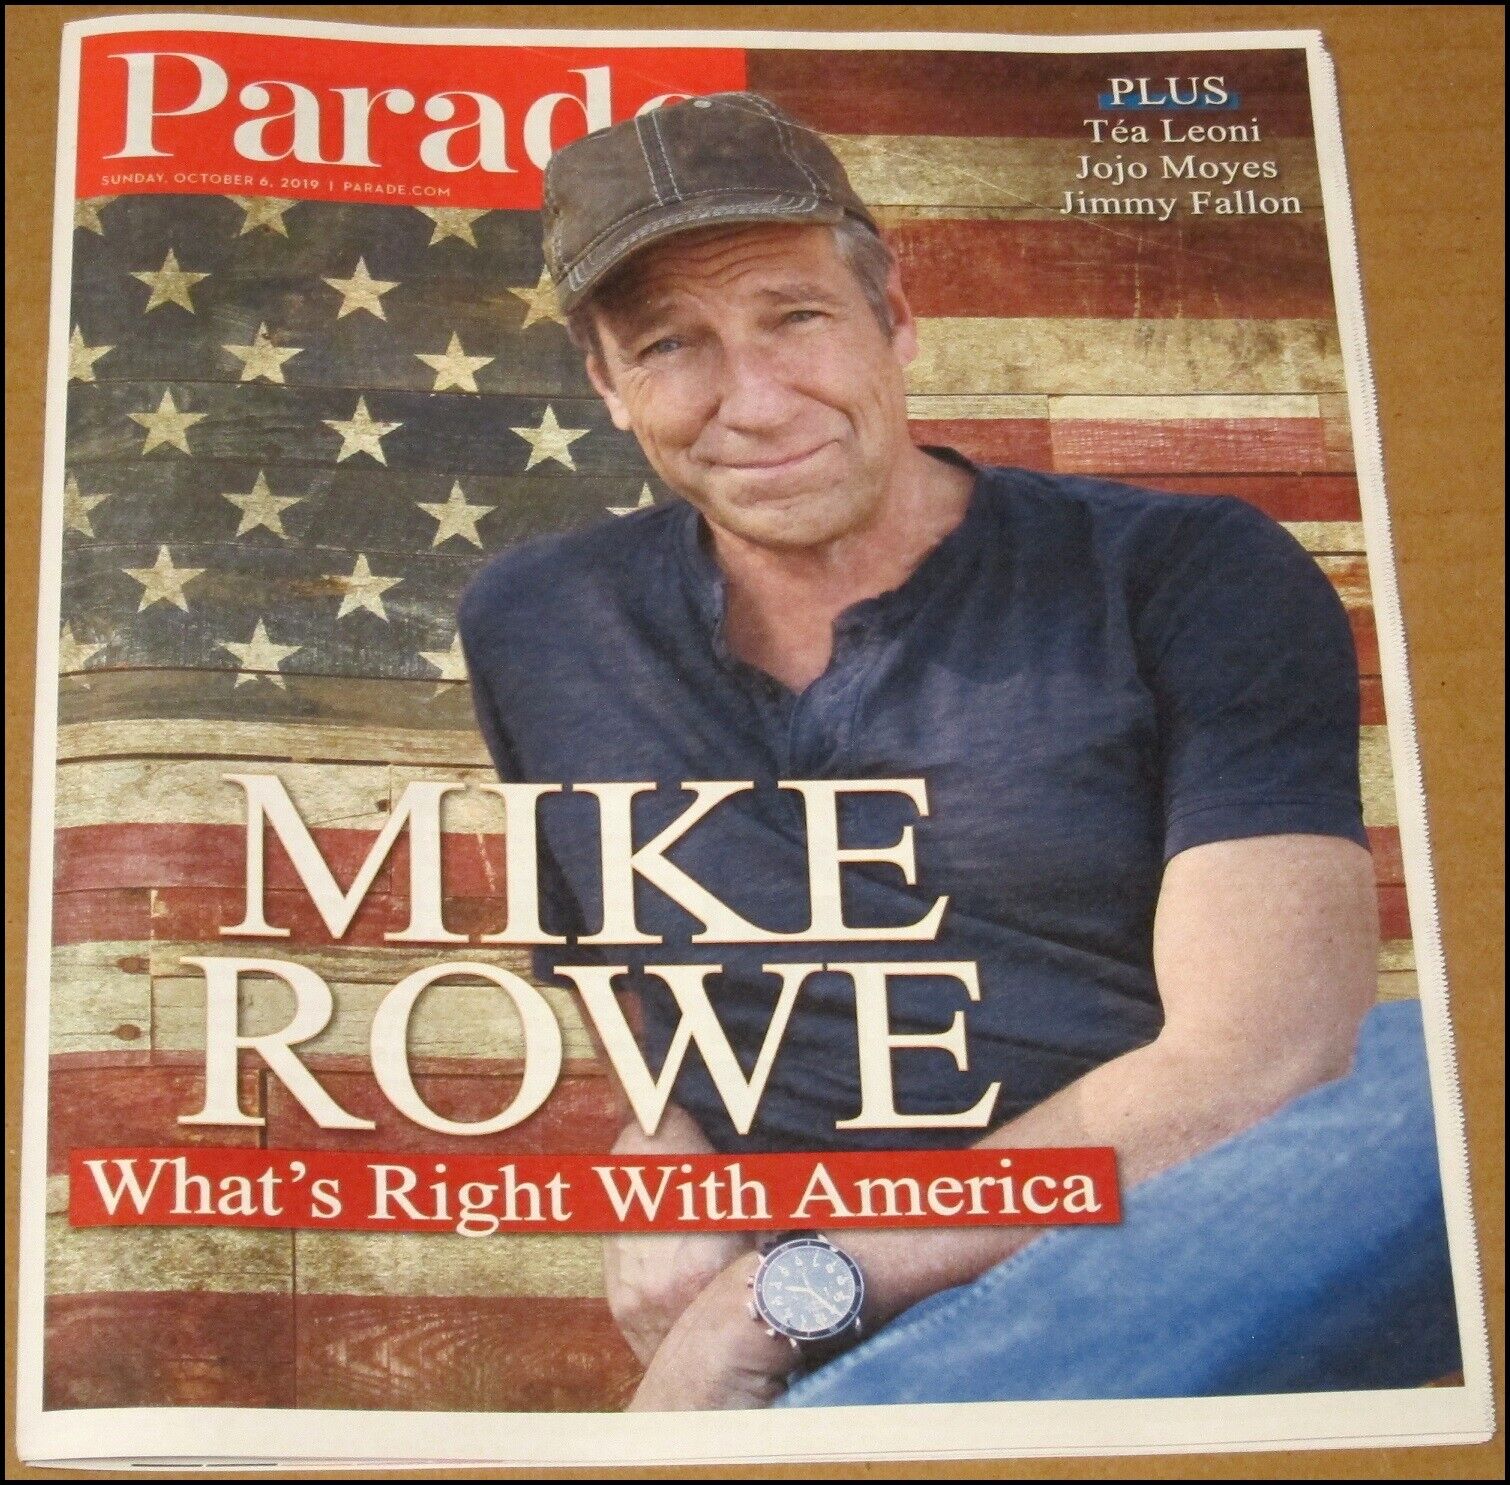 10/6/2019 Parade Newspaper Magazine Mike Rowe Returning the Favor Facebook Oct 6